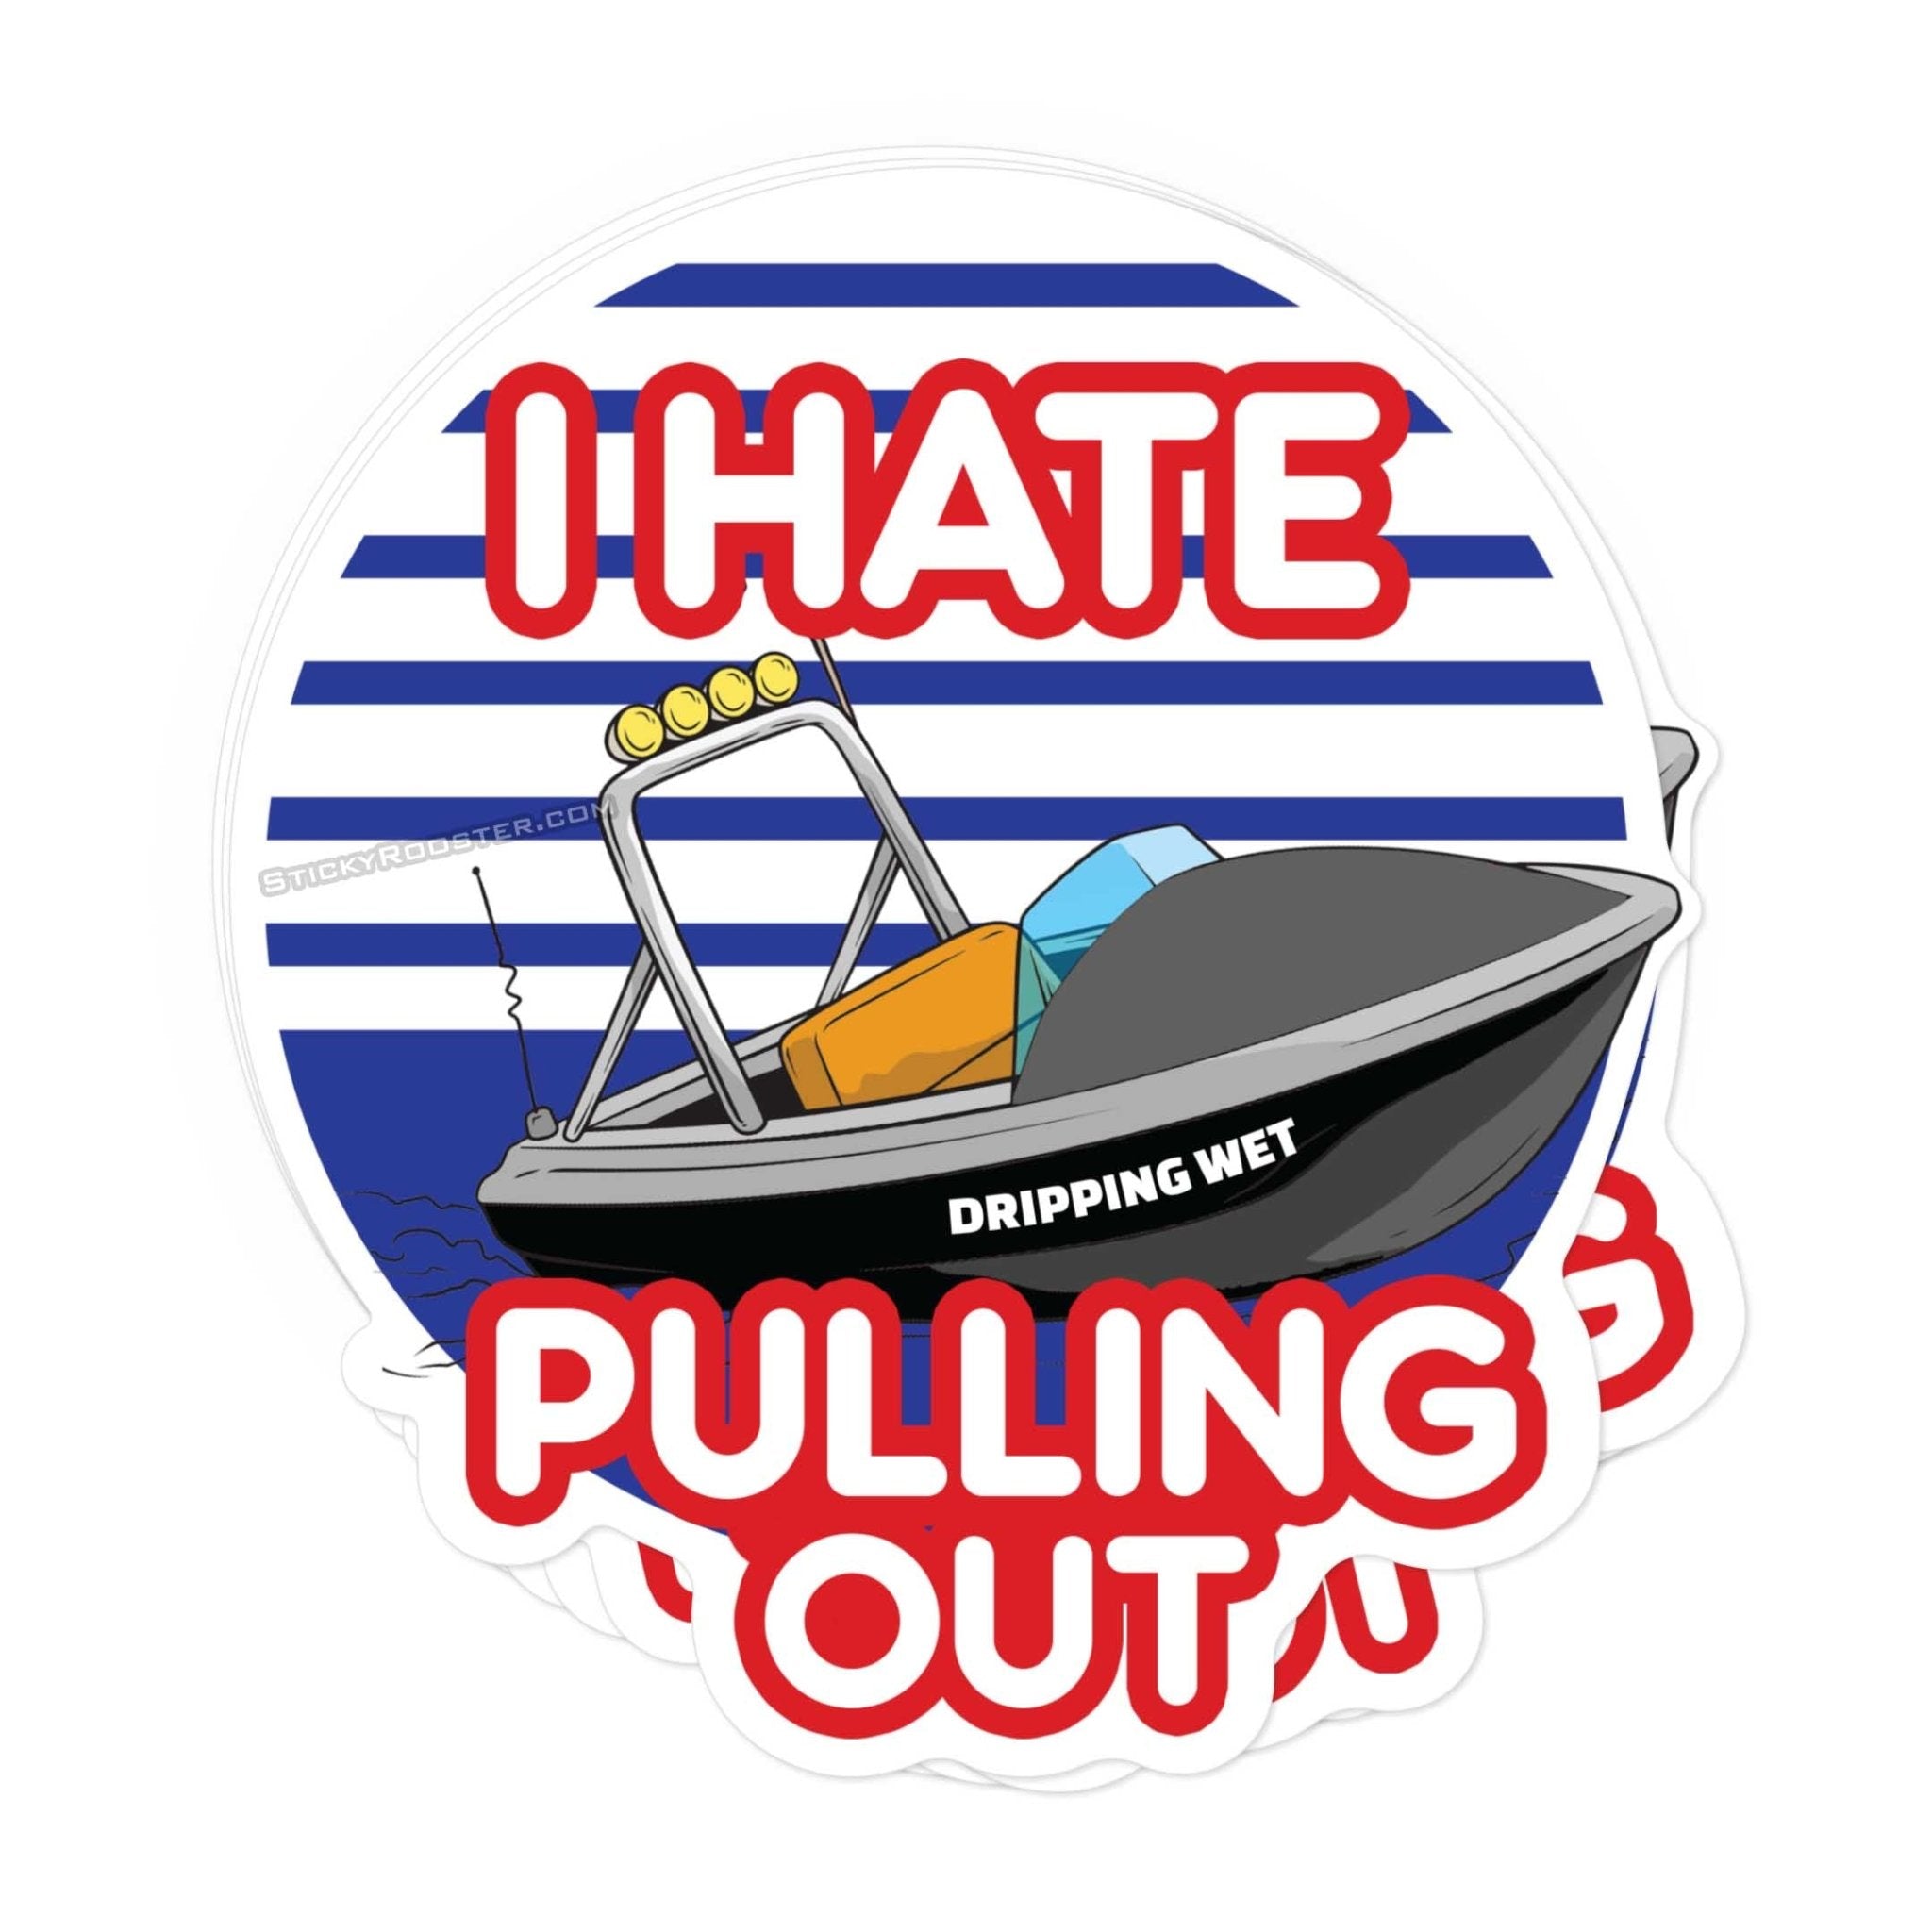 I Hate Pulling Out Speed Boat sticker